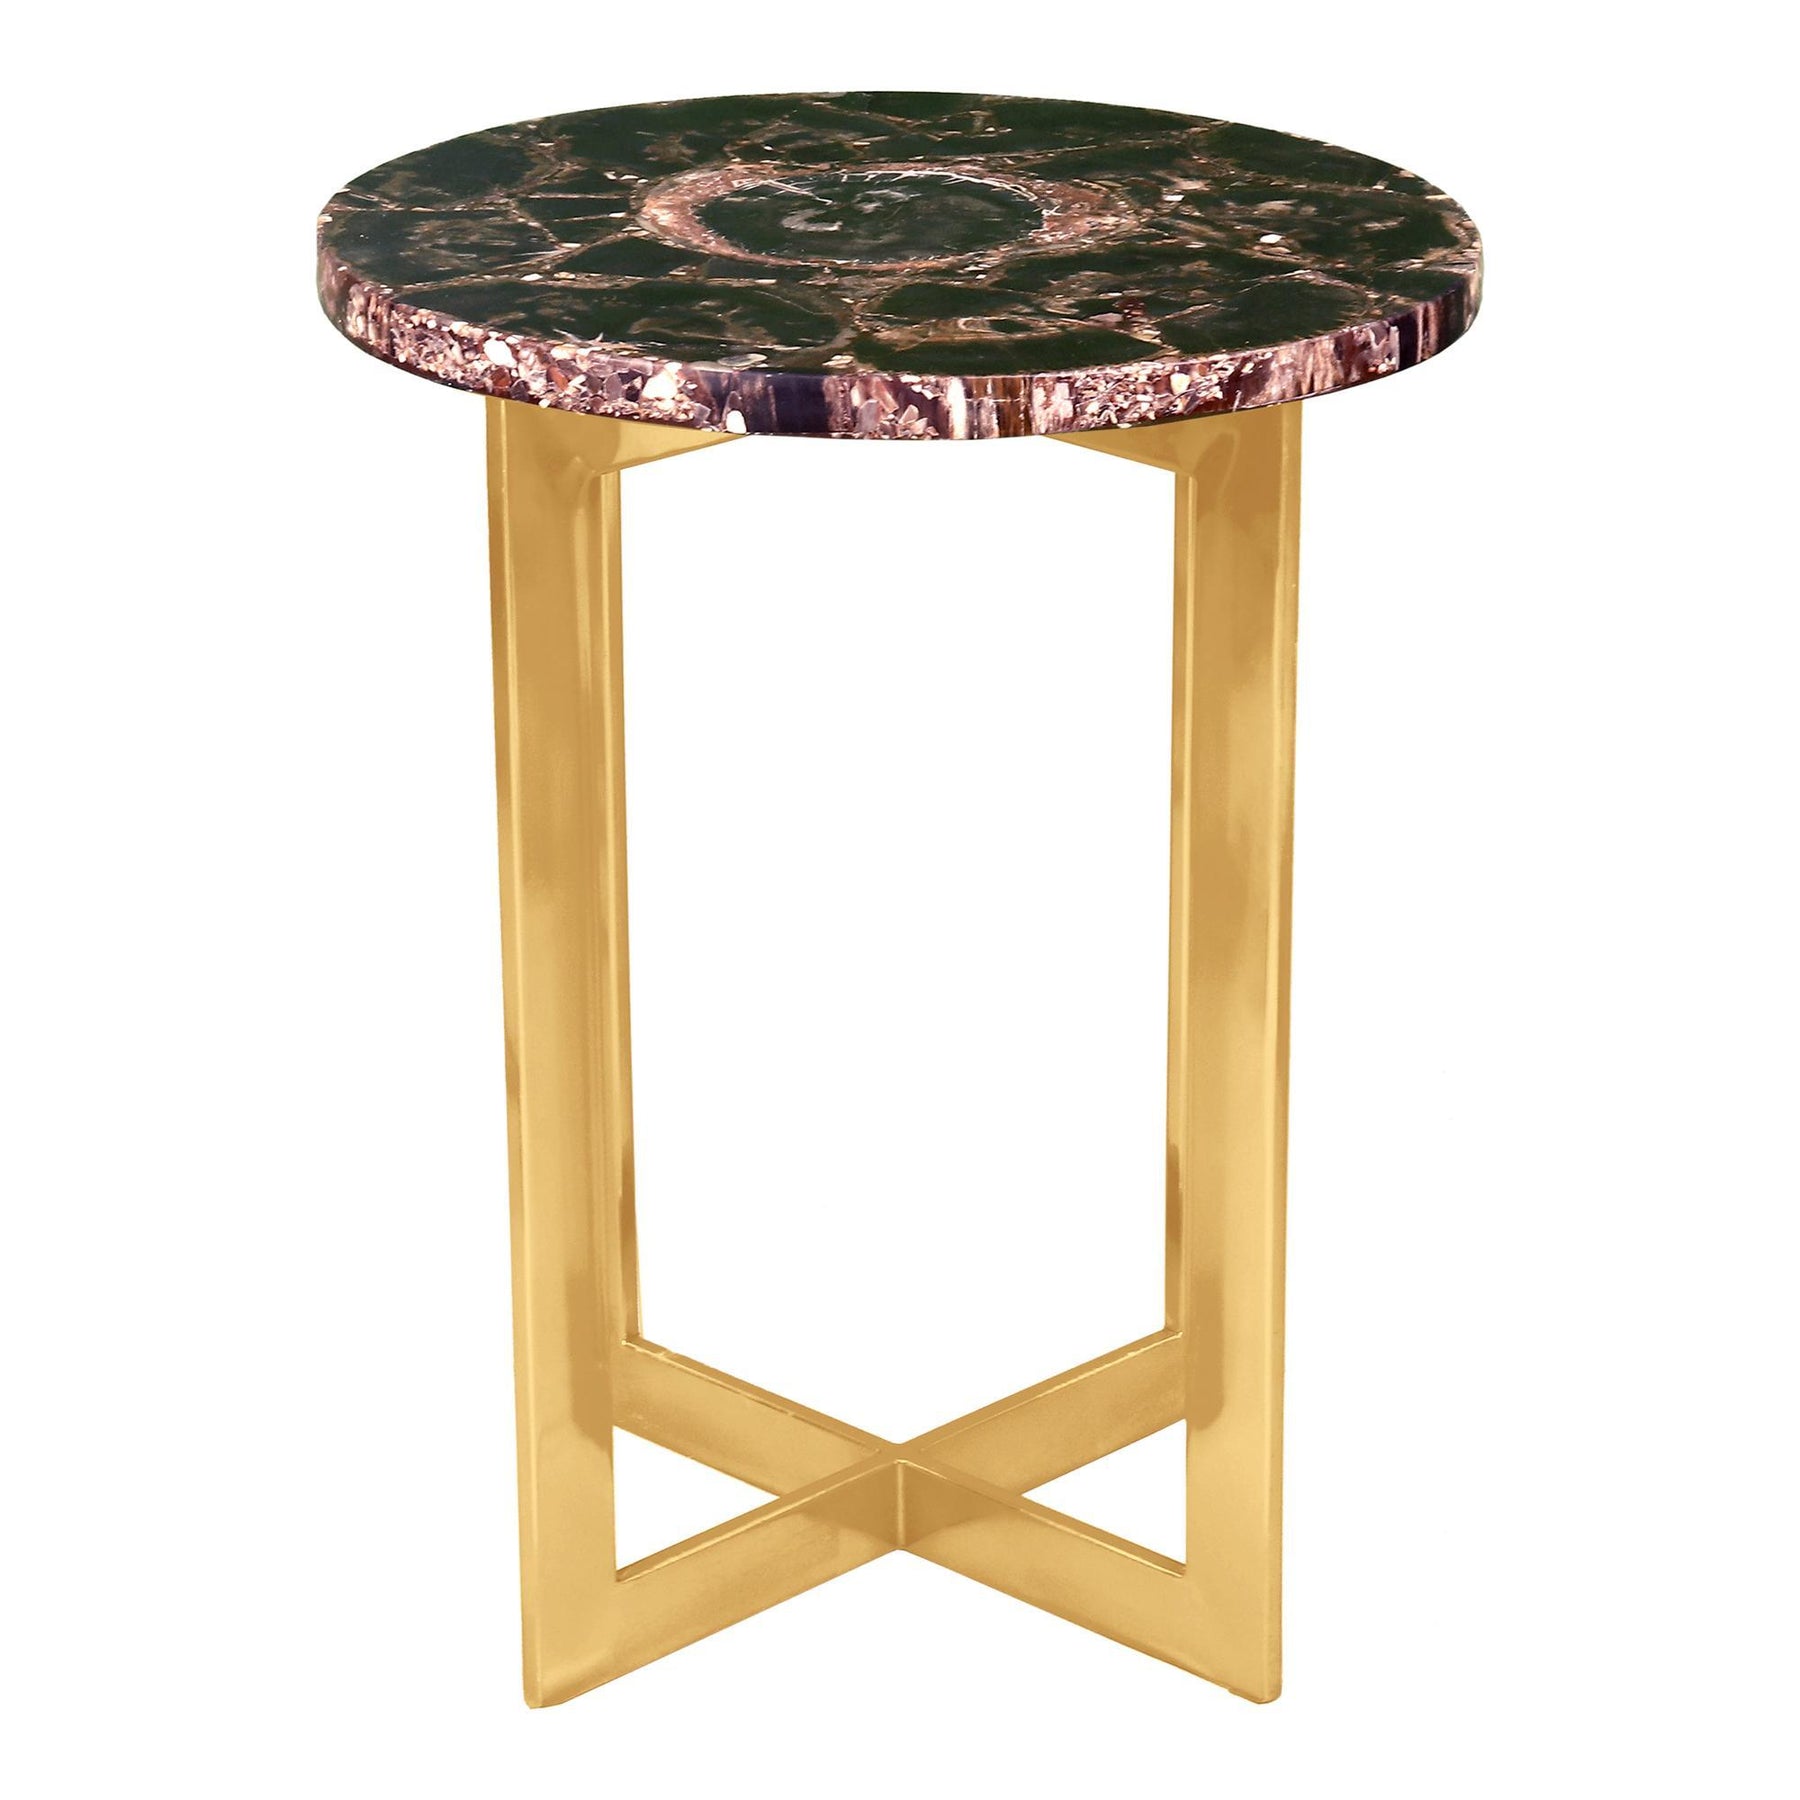 Moe's Home Collection Fossil Accent Table - PJ-1015-02